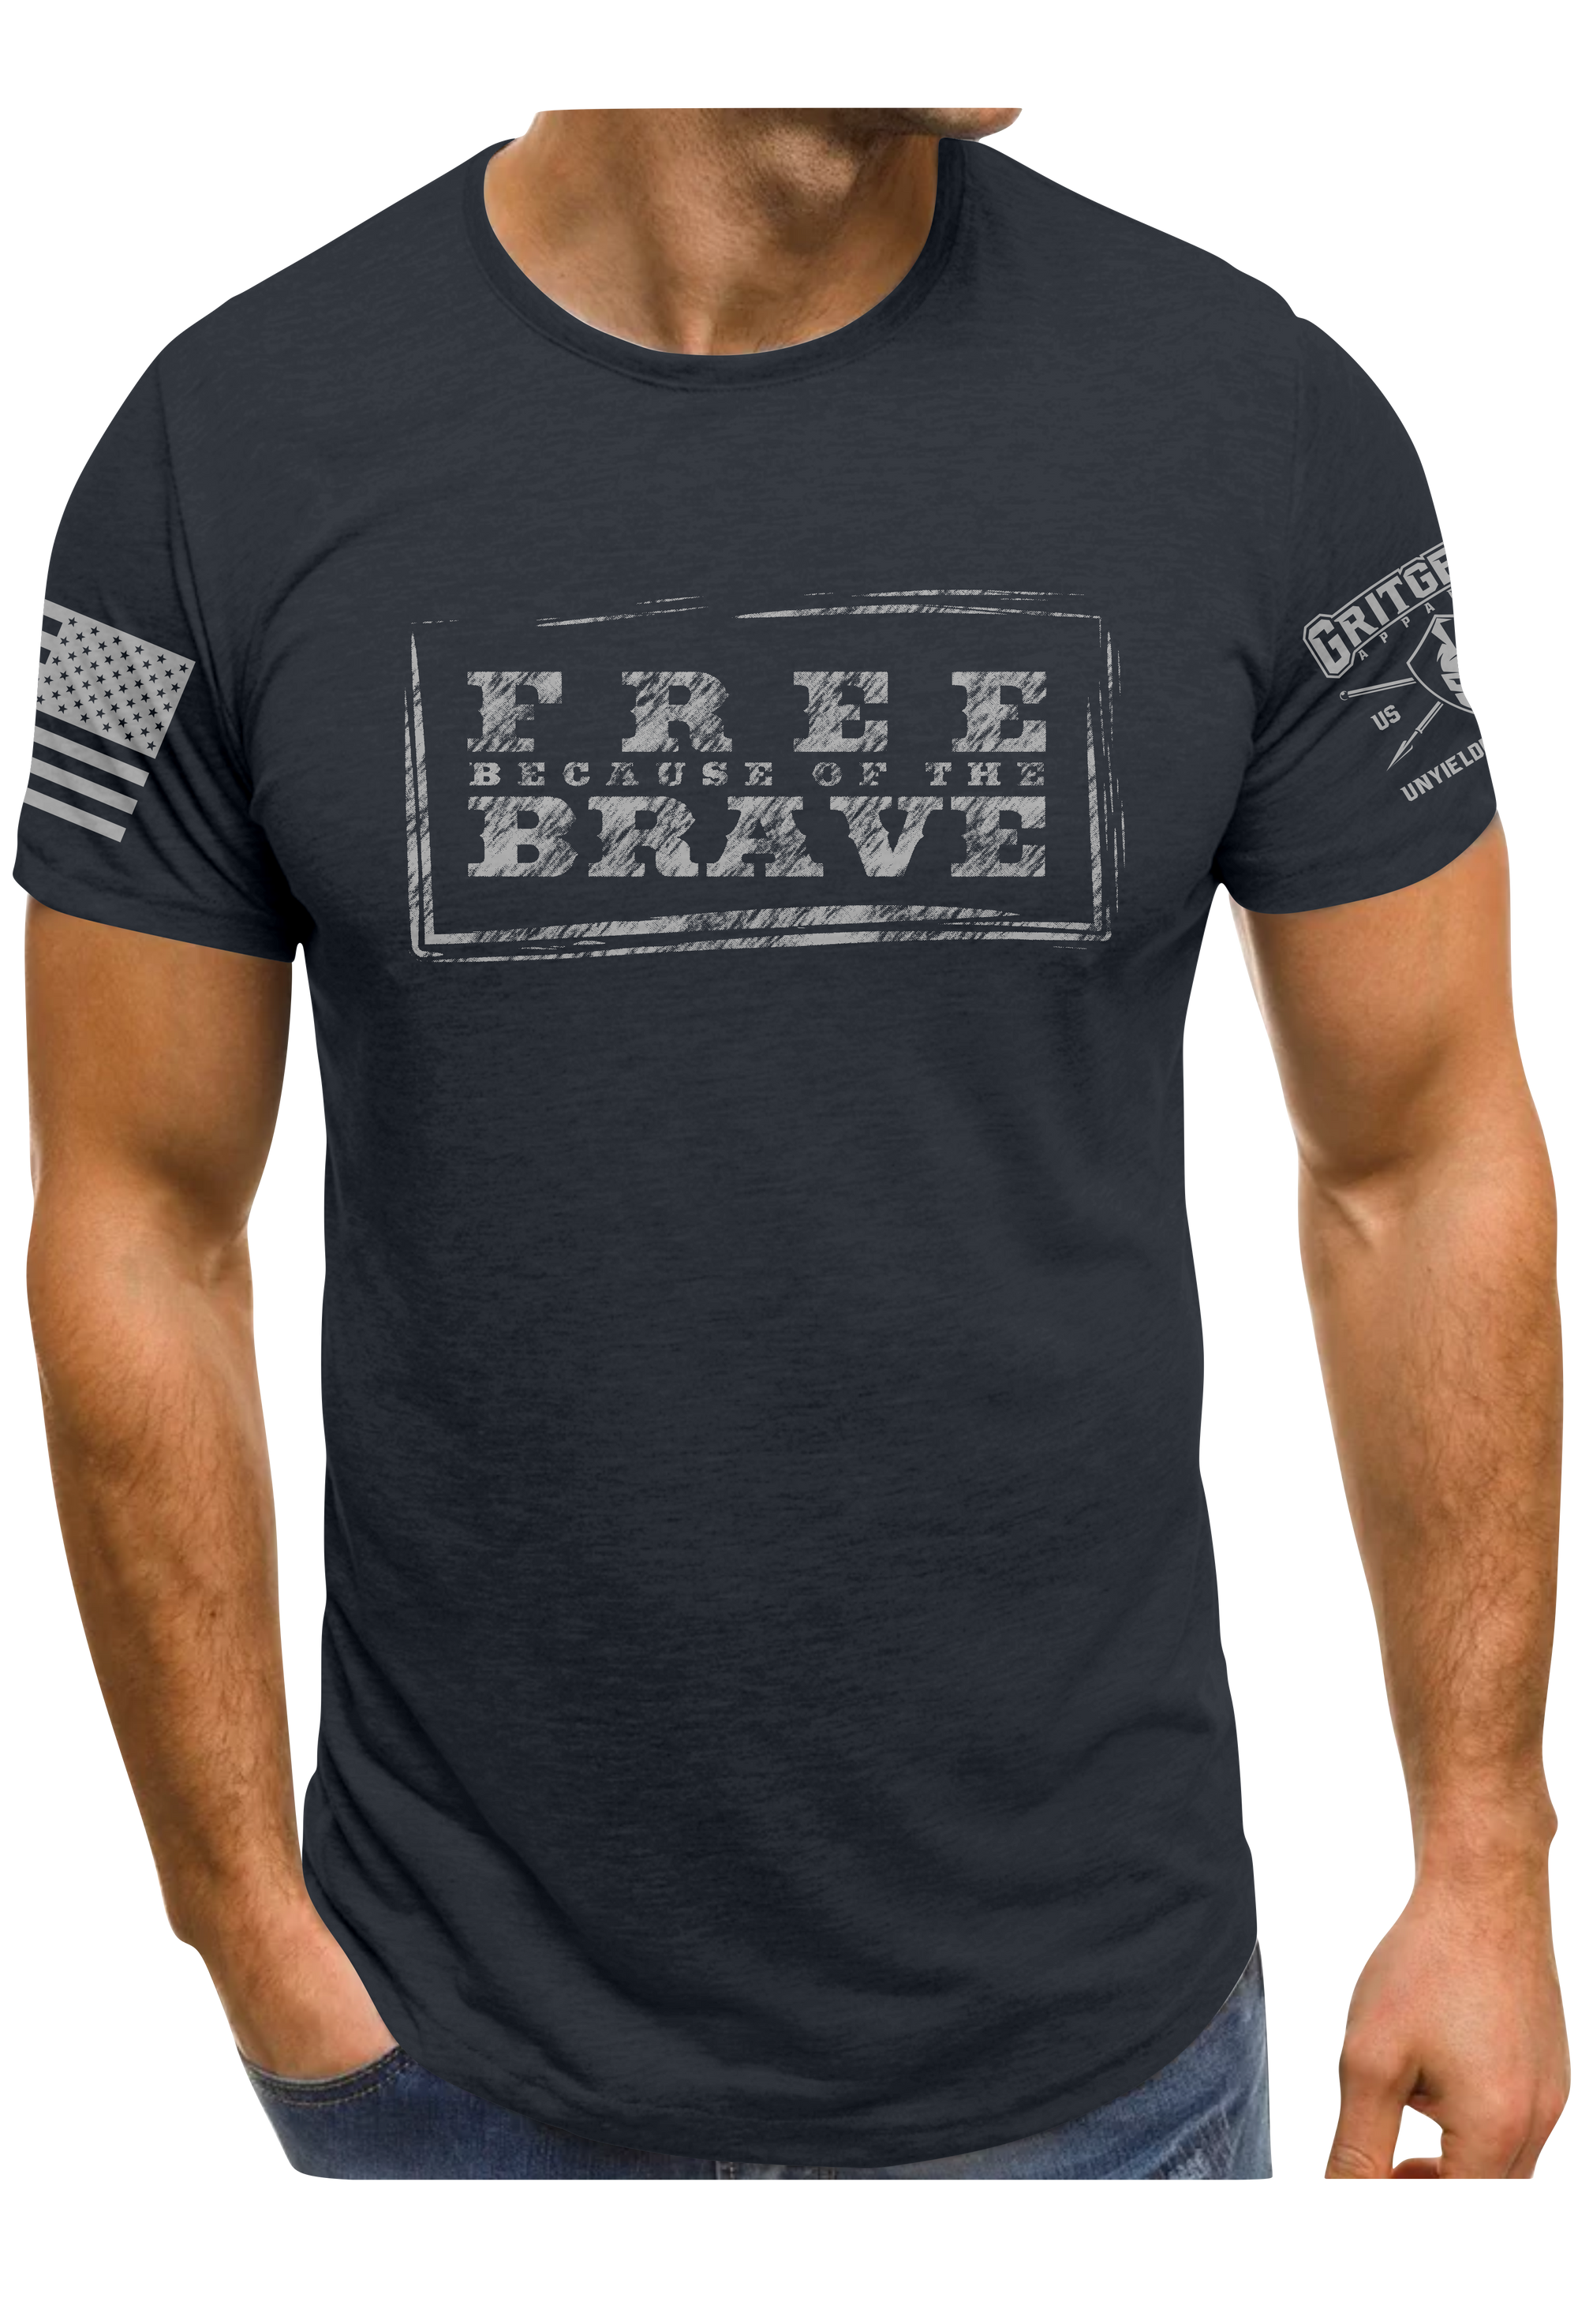 Free Because of the Brave T-shirt | Grit Gear Apparel ®